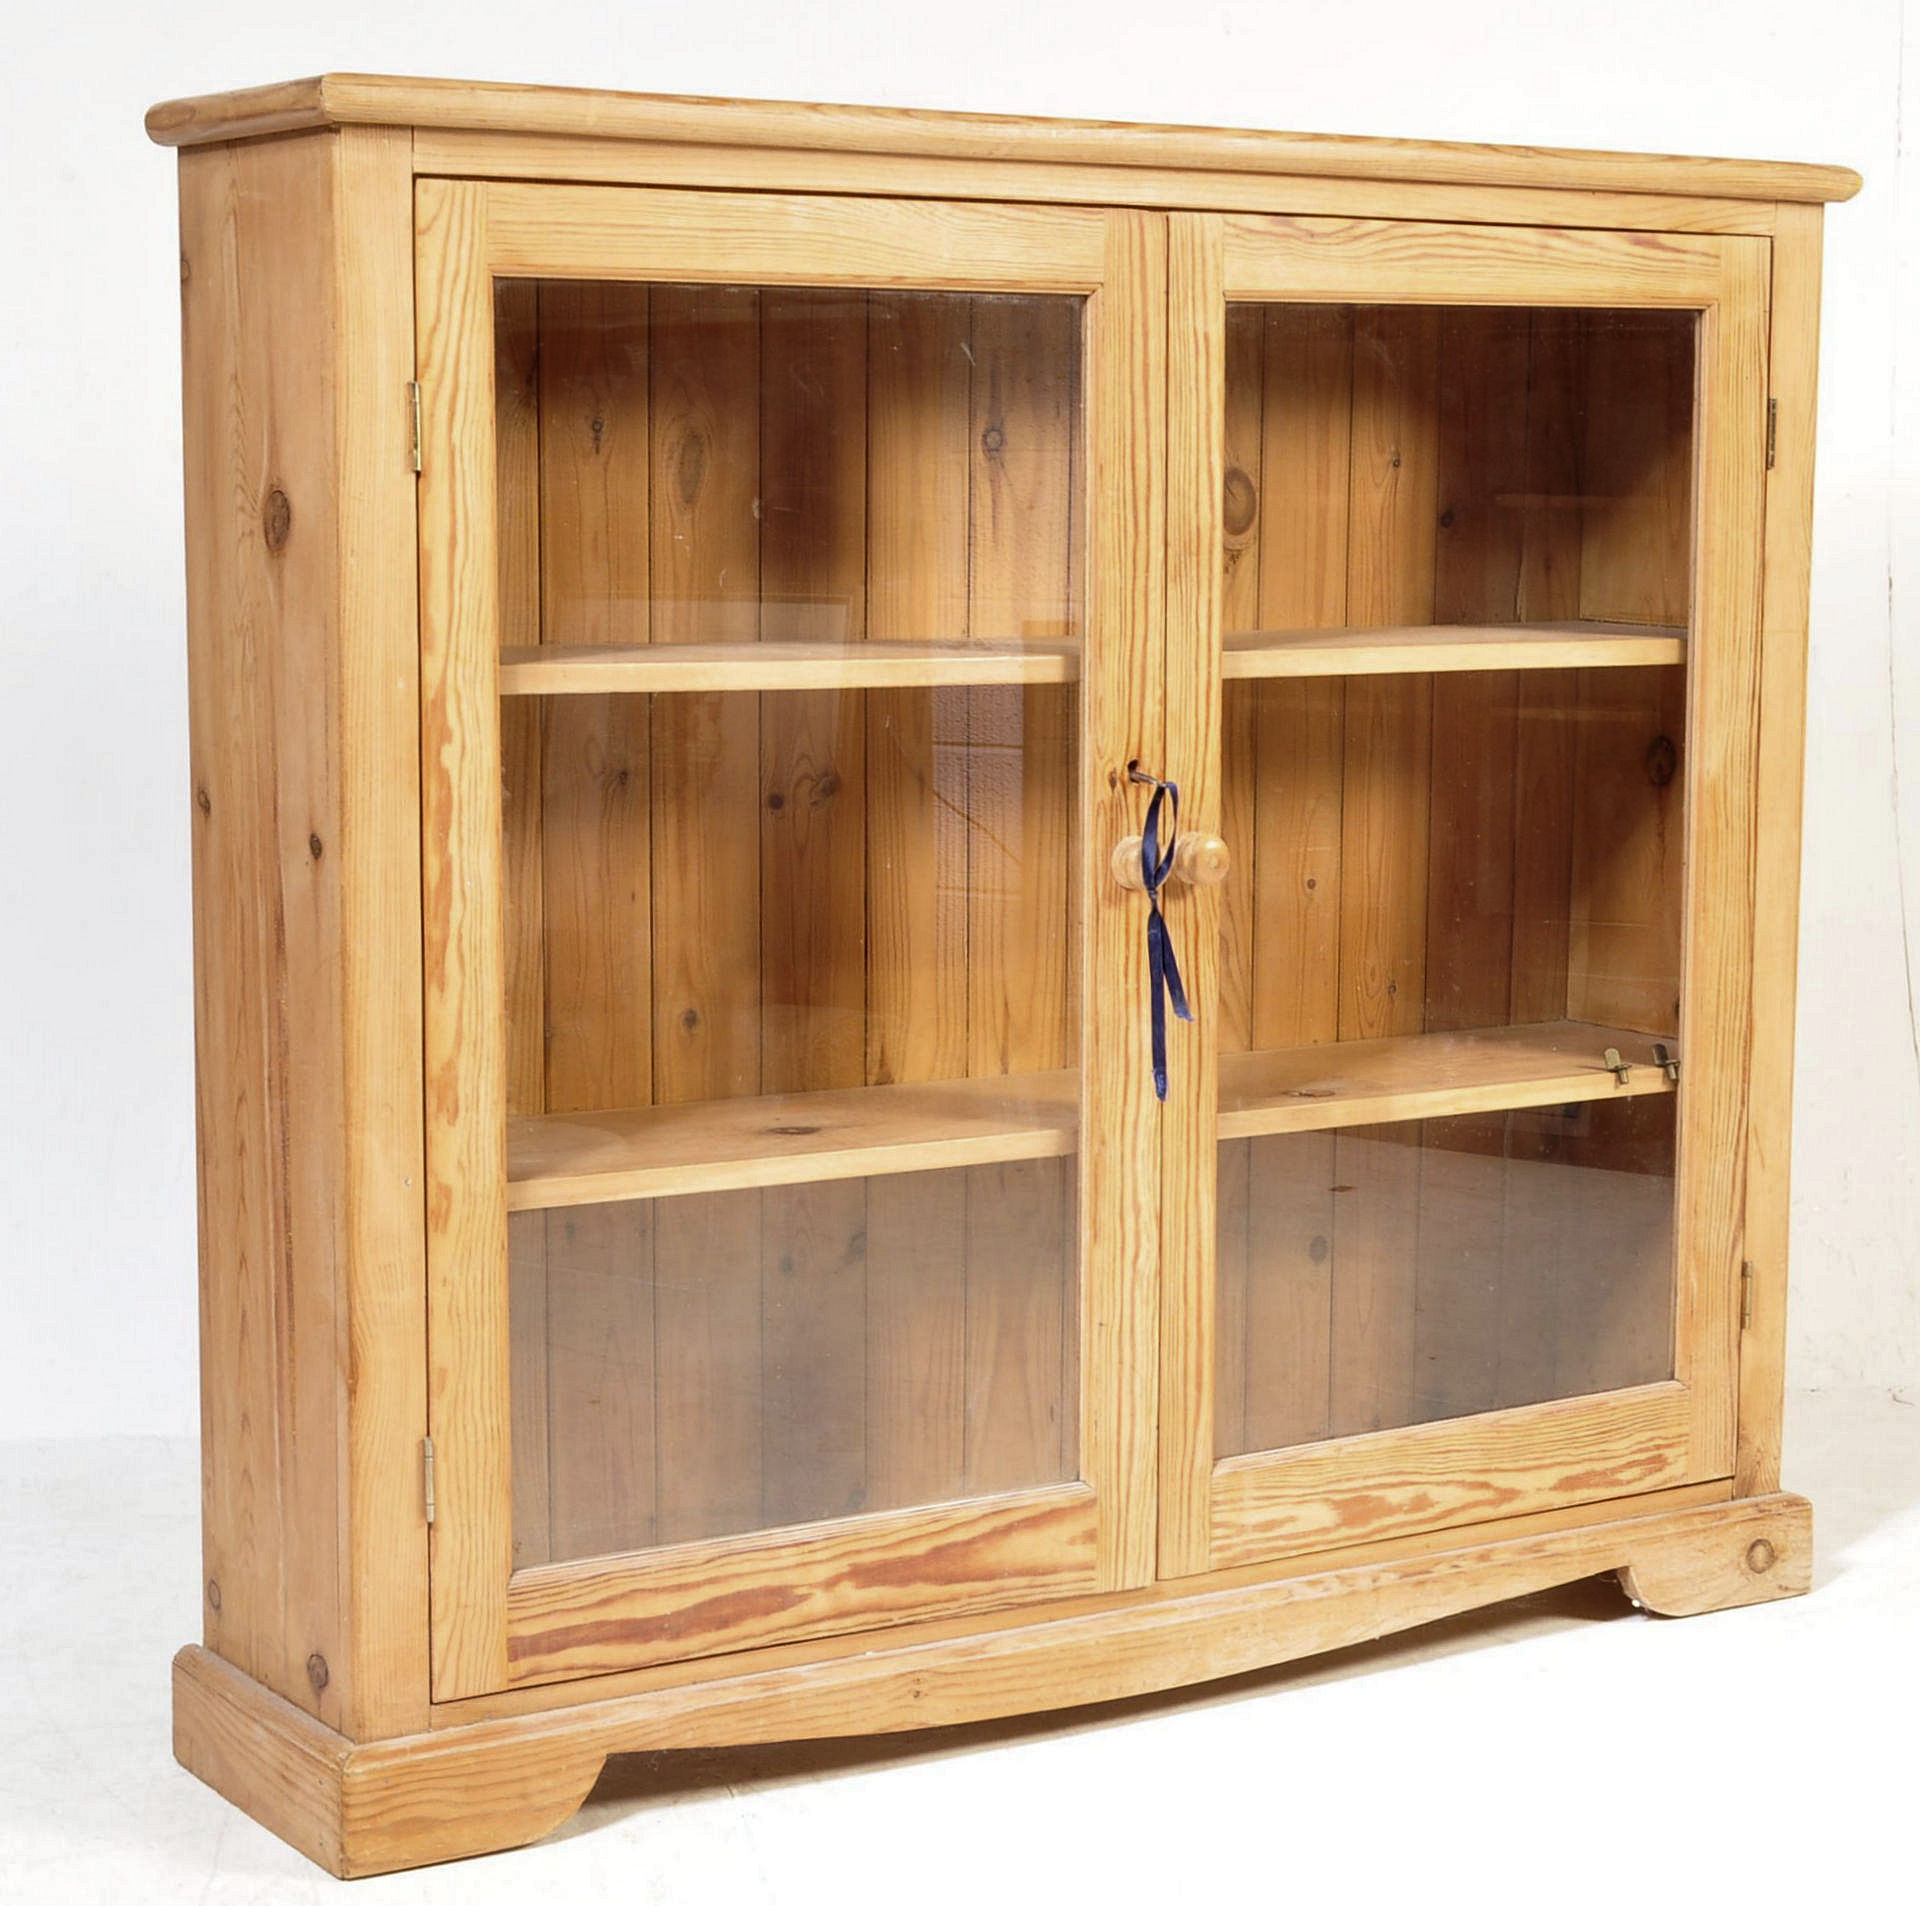 A VICTORIAN STYLE PINE LIBRARY BOOKCASE DISPLAY CABINET